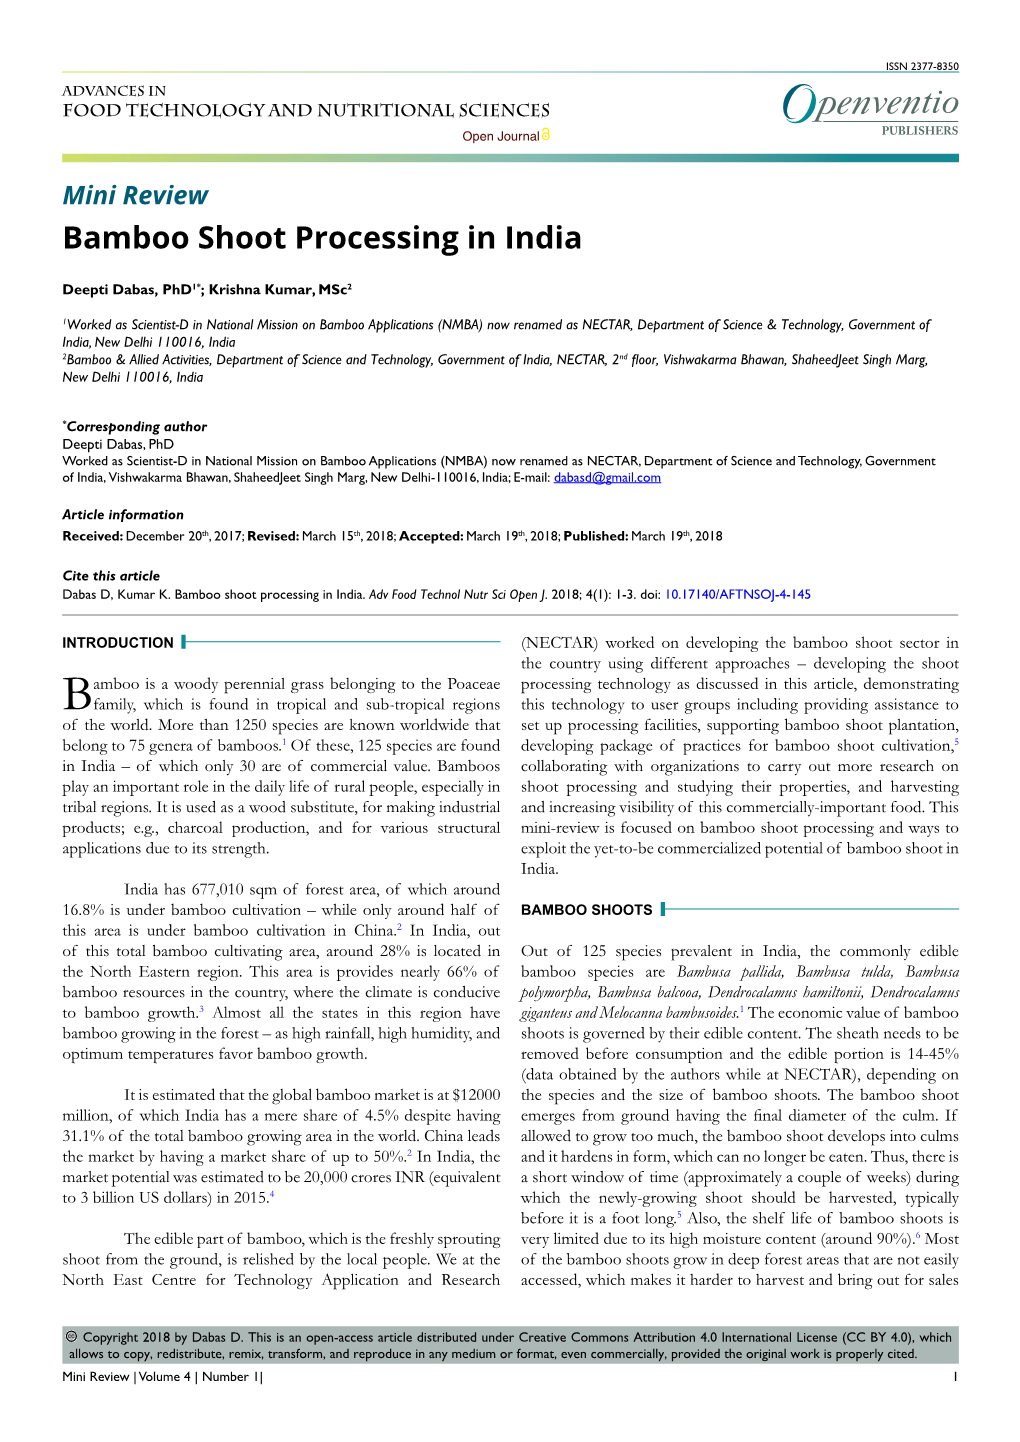 Bamboo Shoot Processing in India